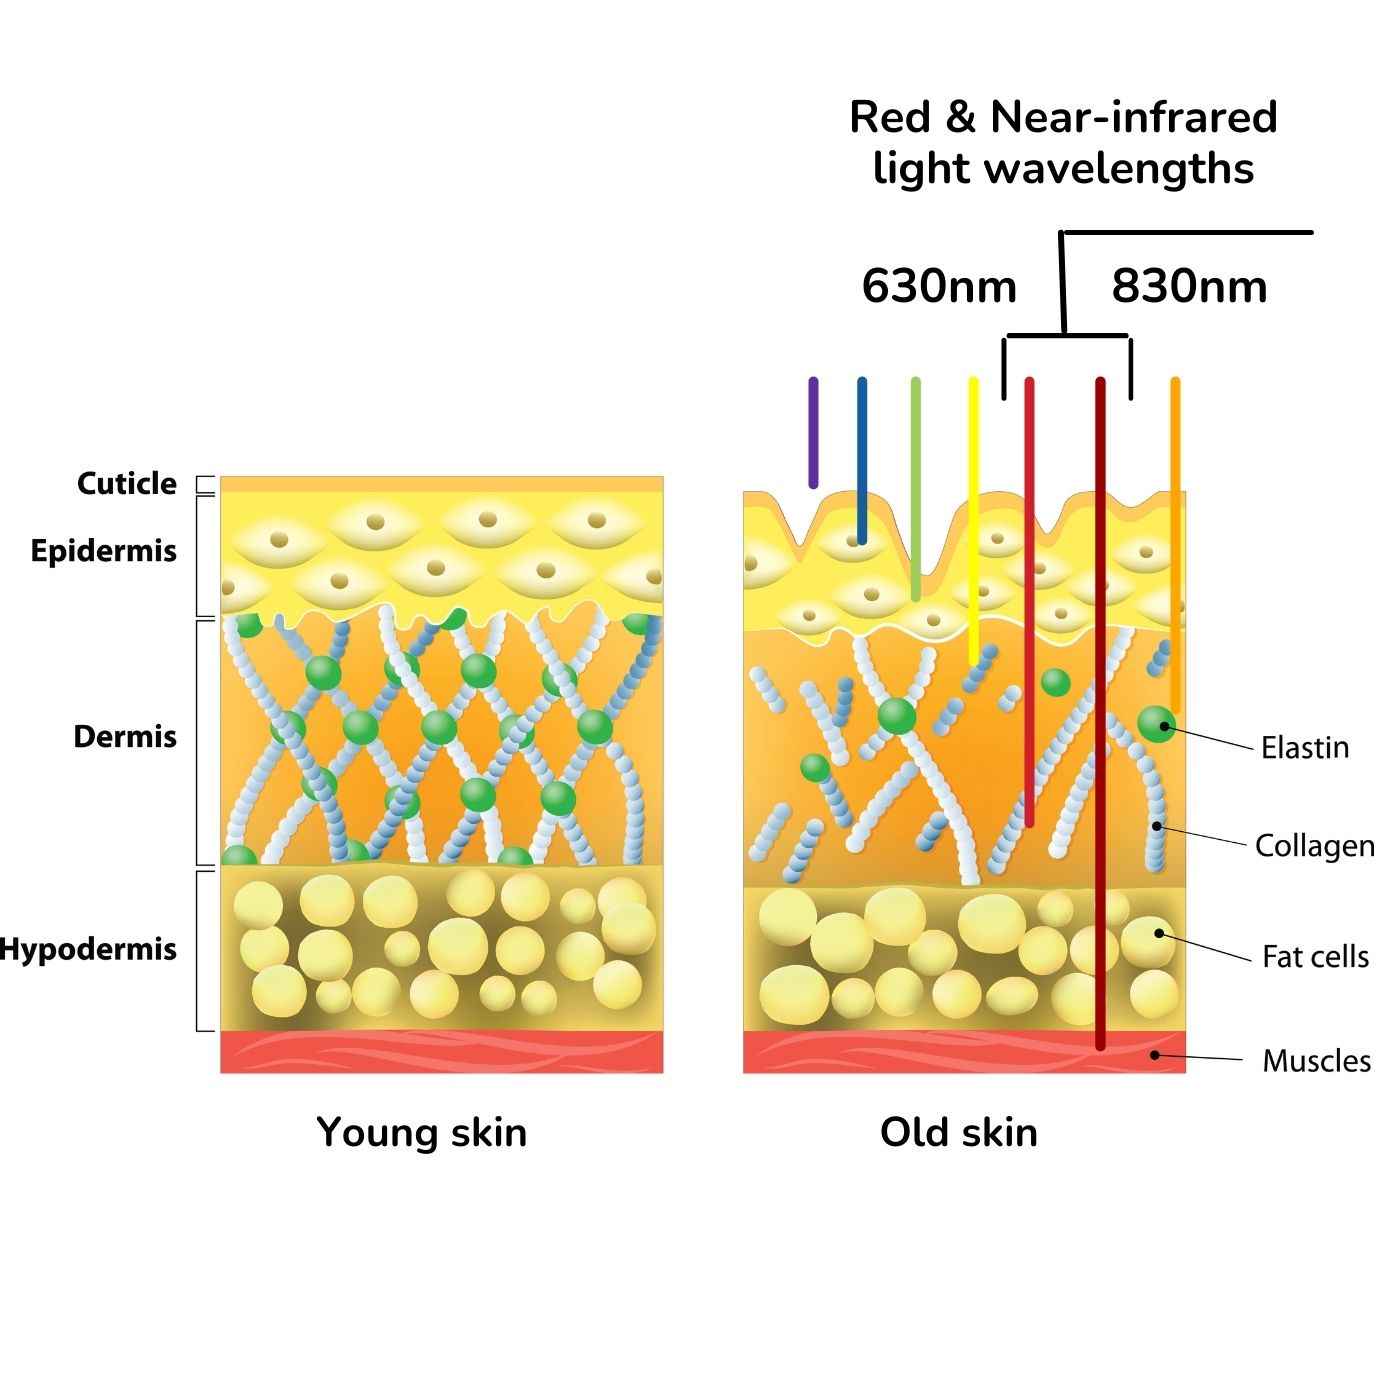 what does red light and near-infrared light do to the skin